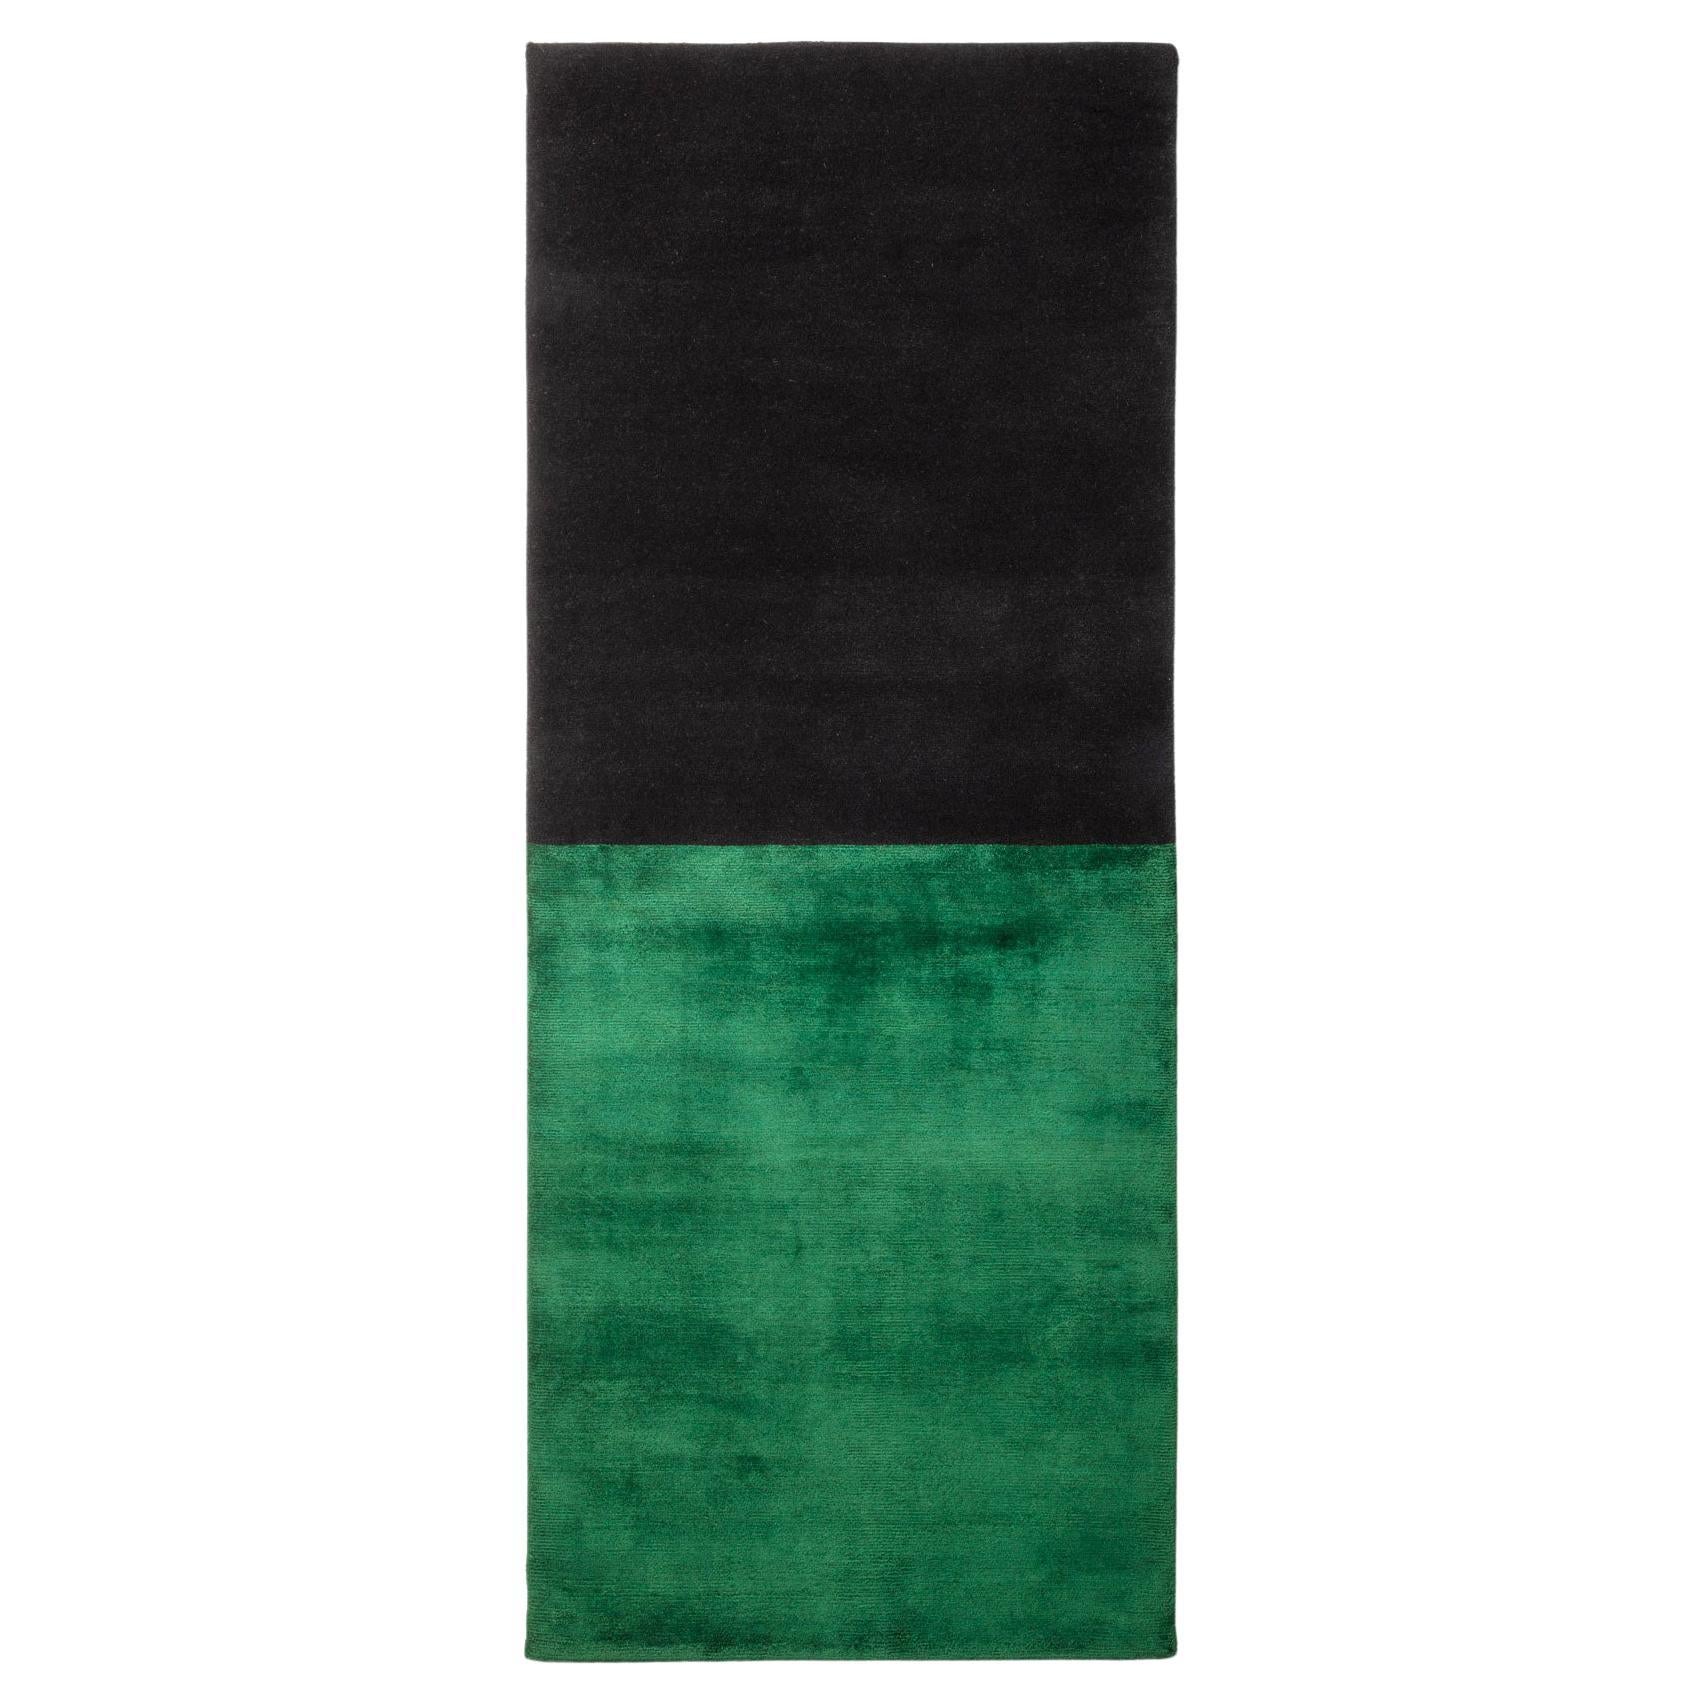 Black / Green Handwoven Tapestry by Calyah For Sale